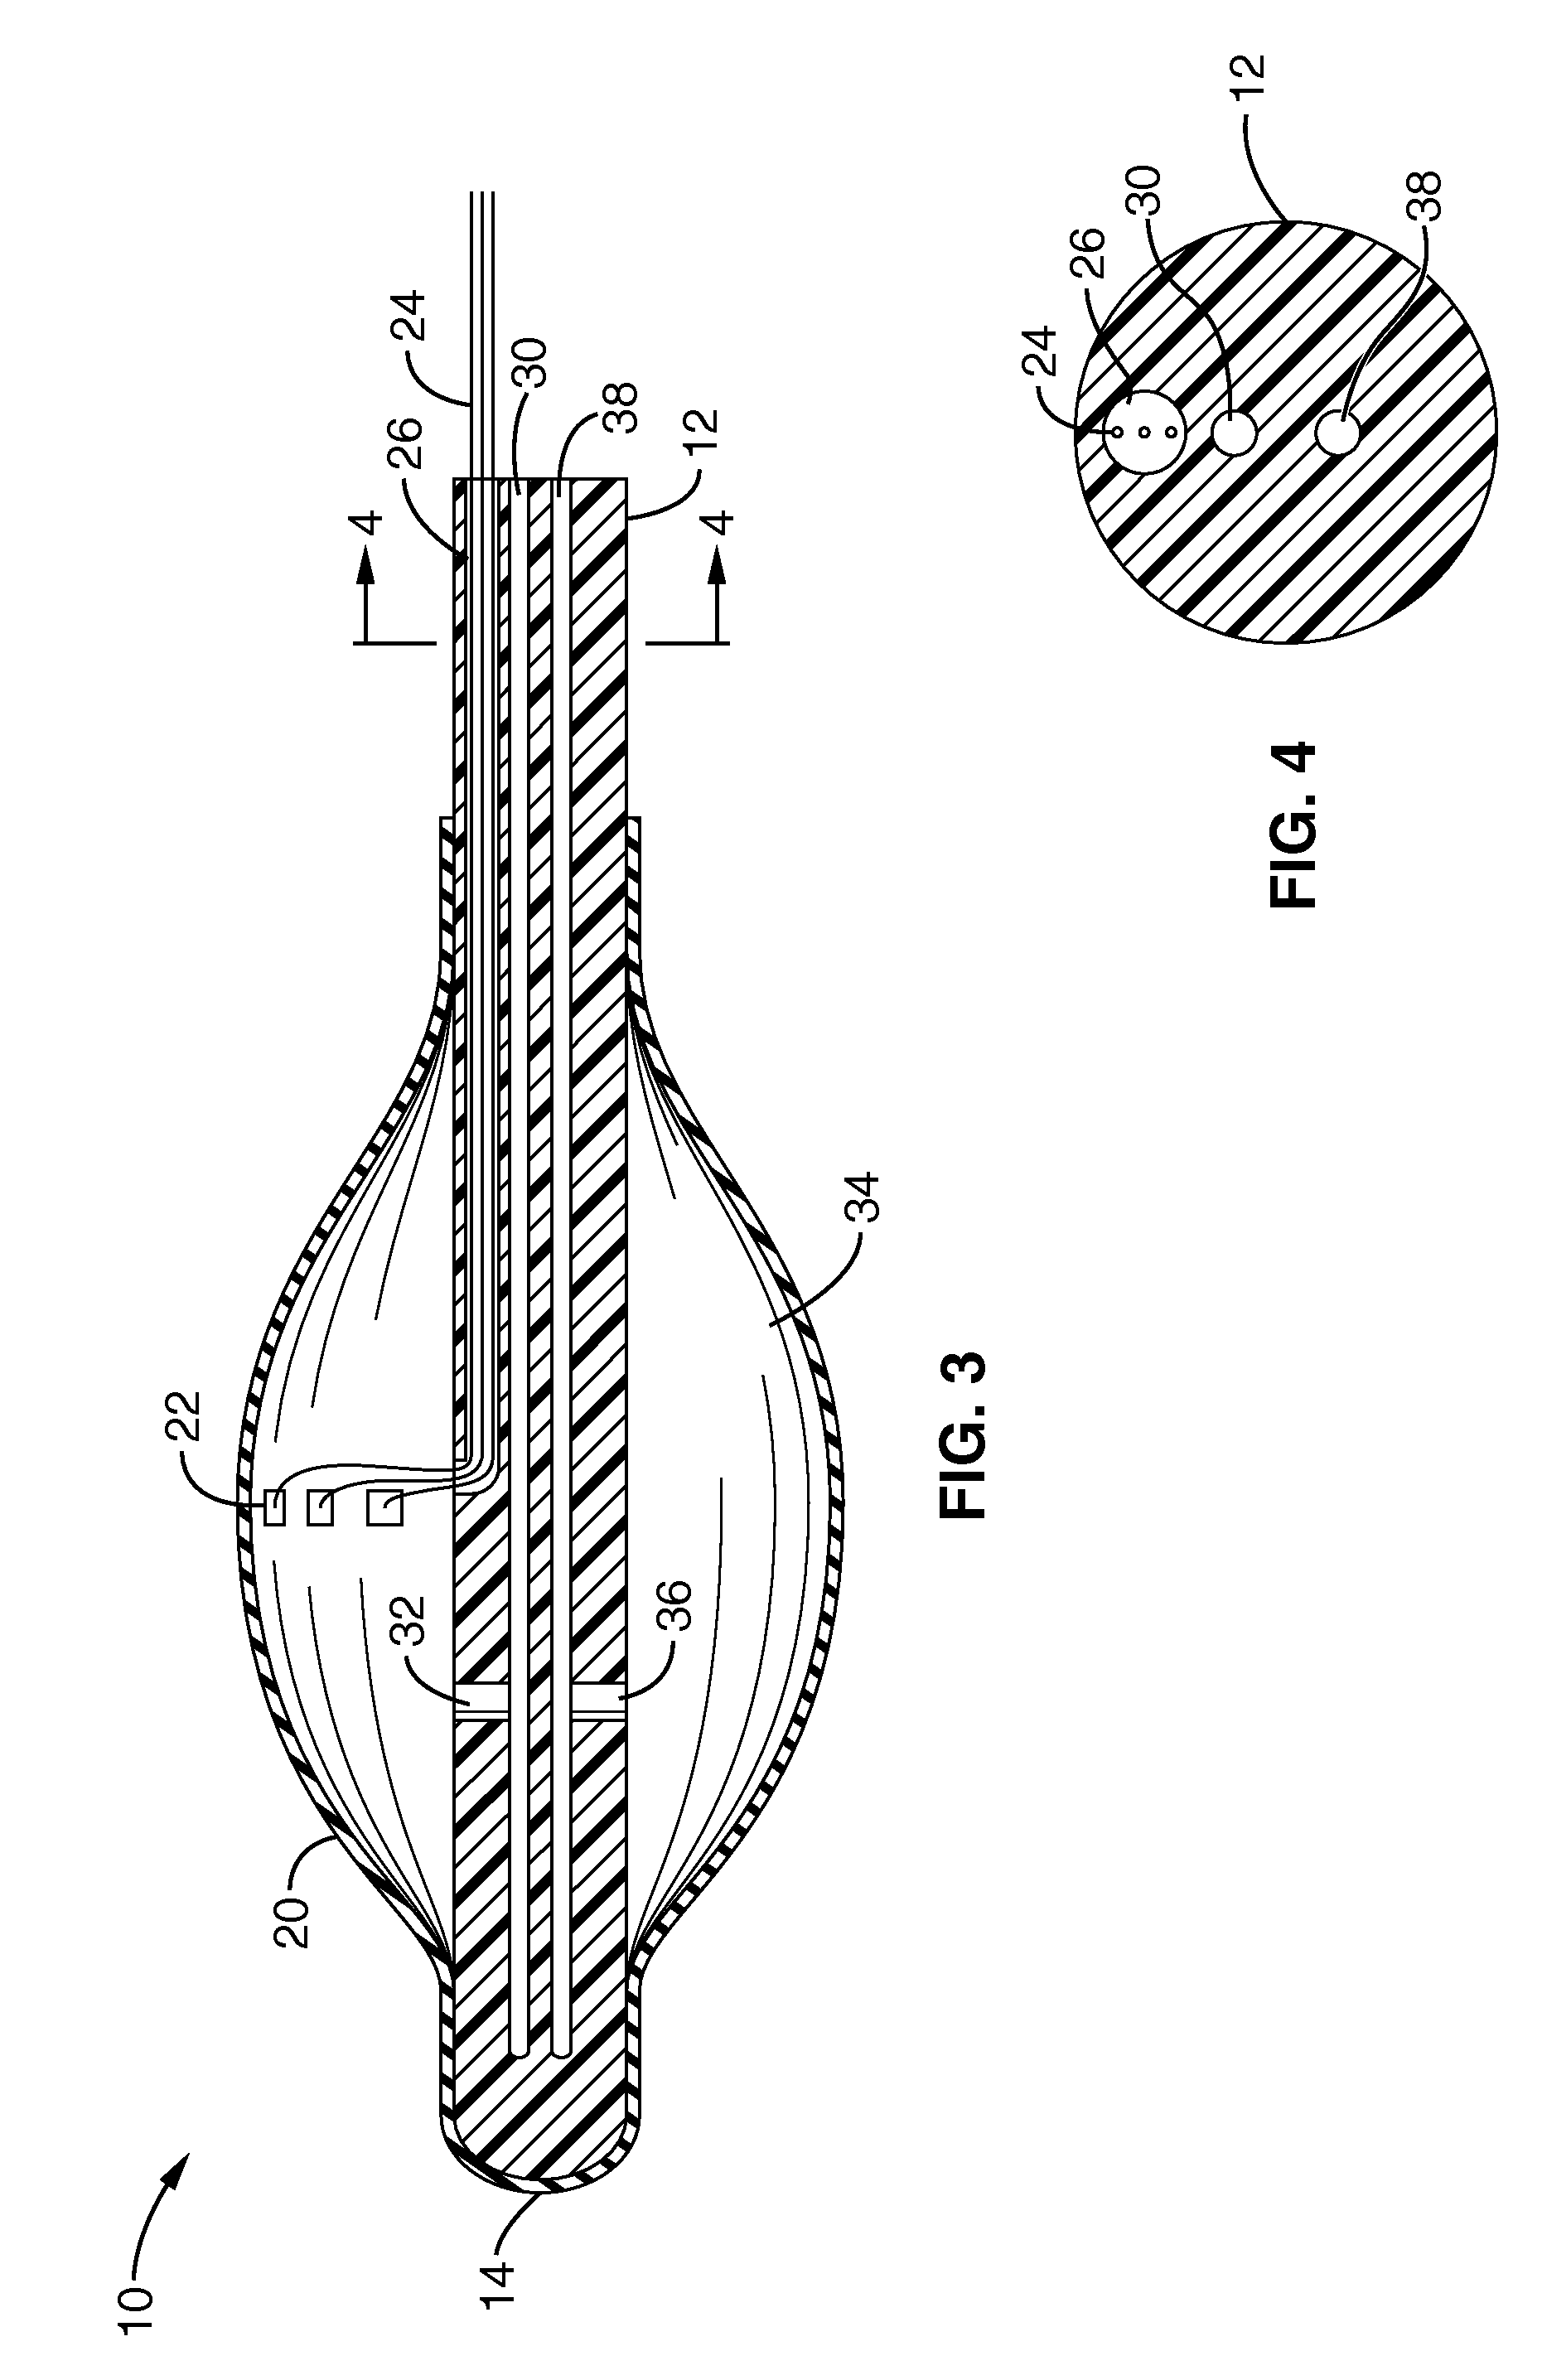 Catheter based balloon for therapy modification and positioning of tissue